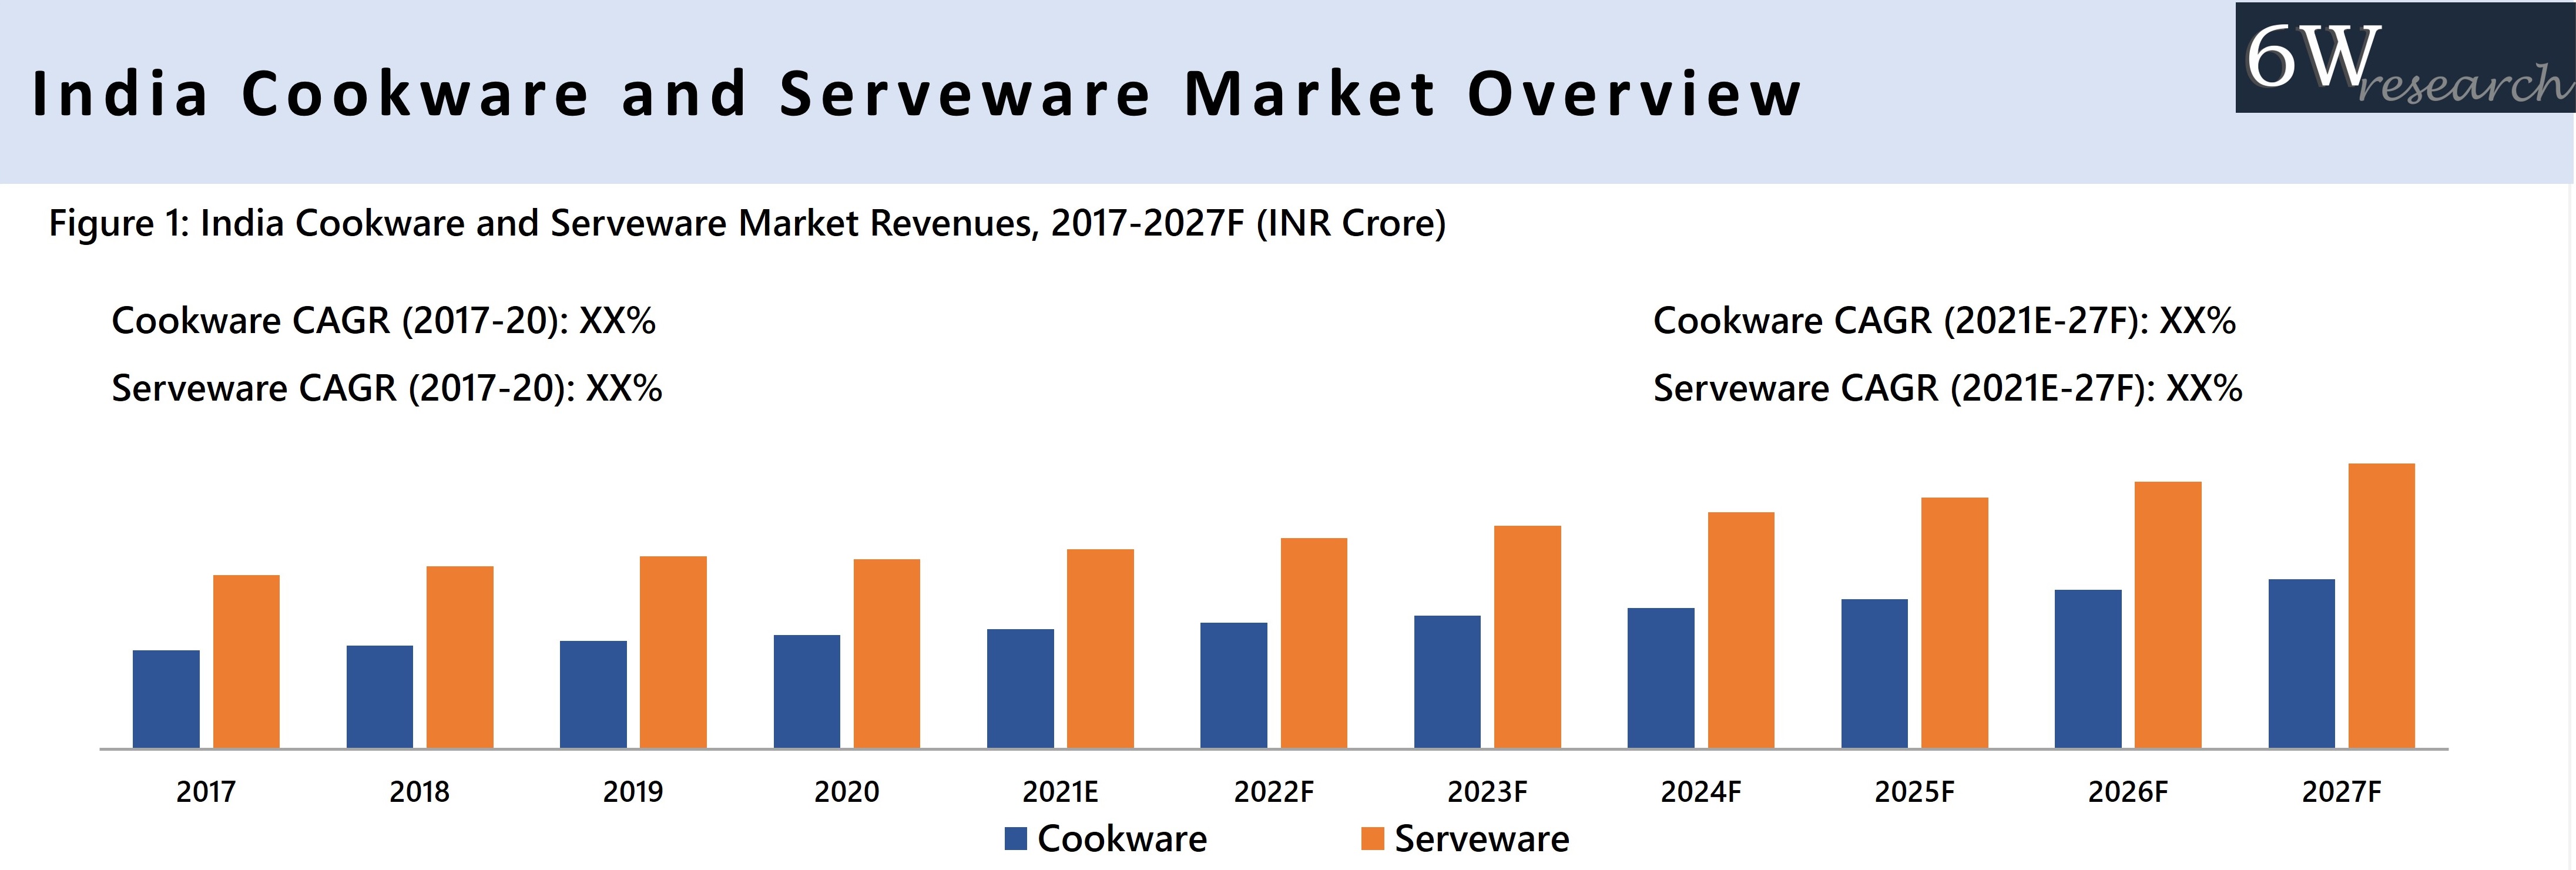 India Cookware and Serveware Market